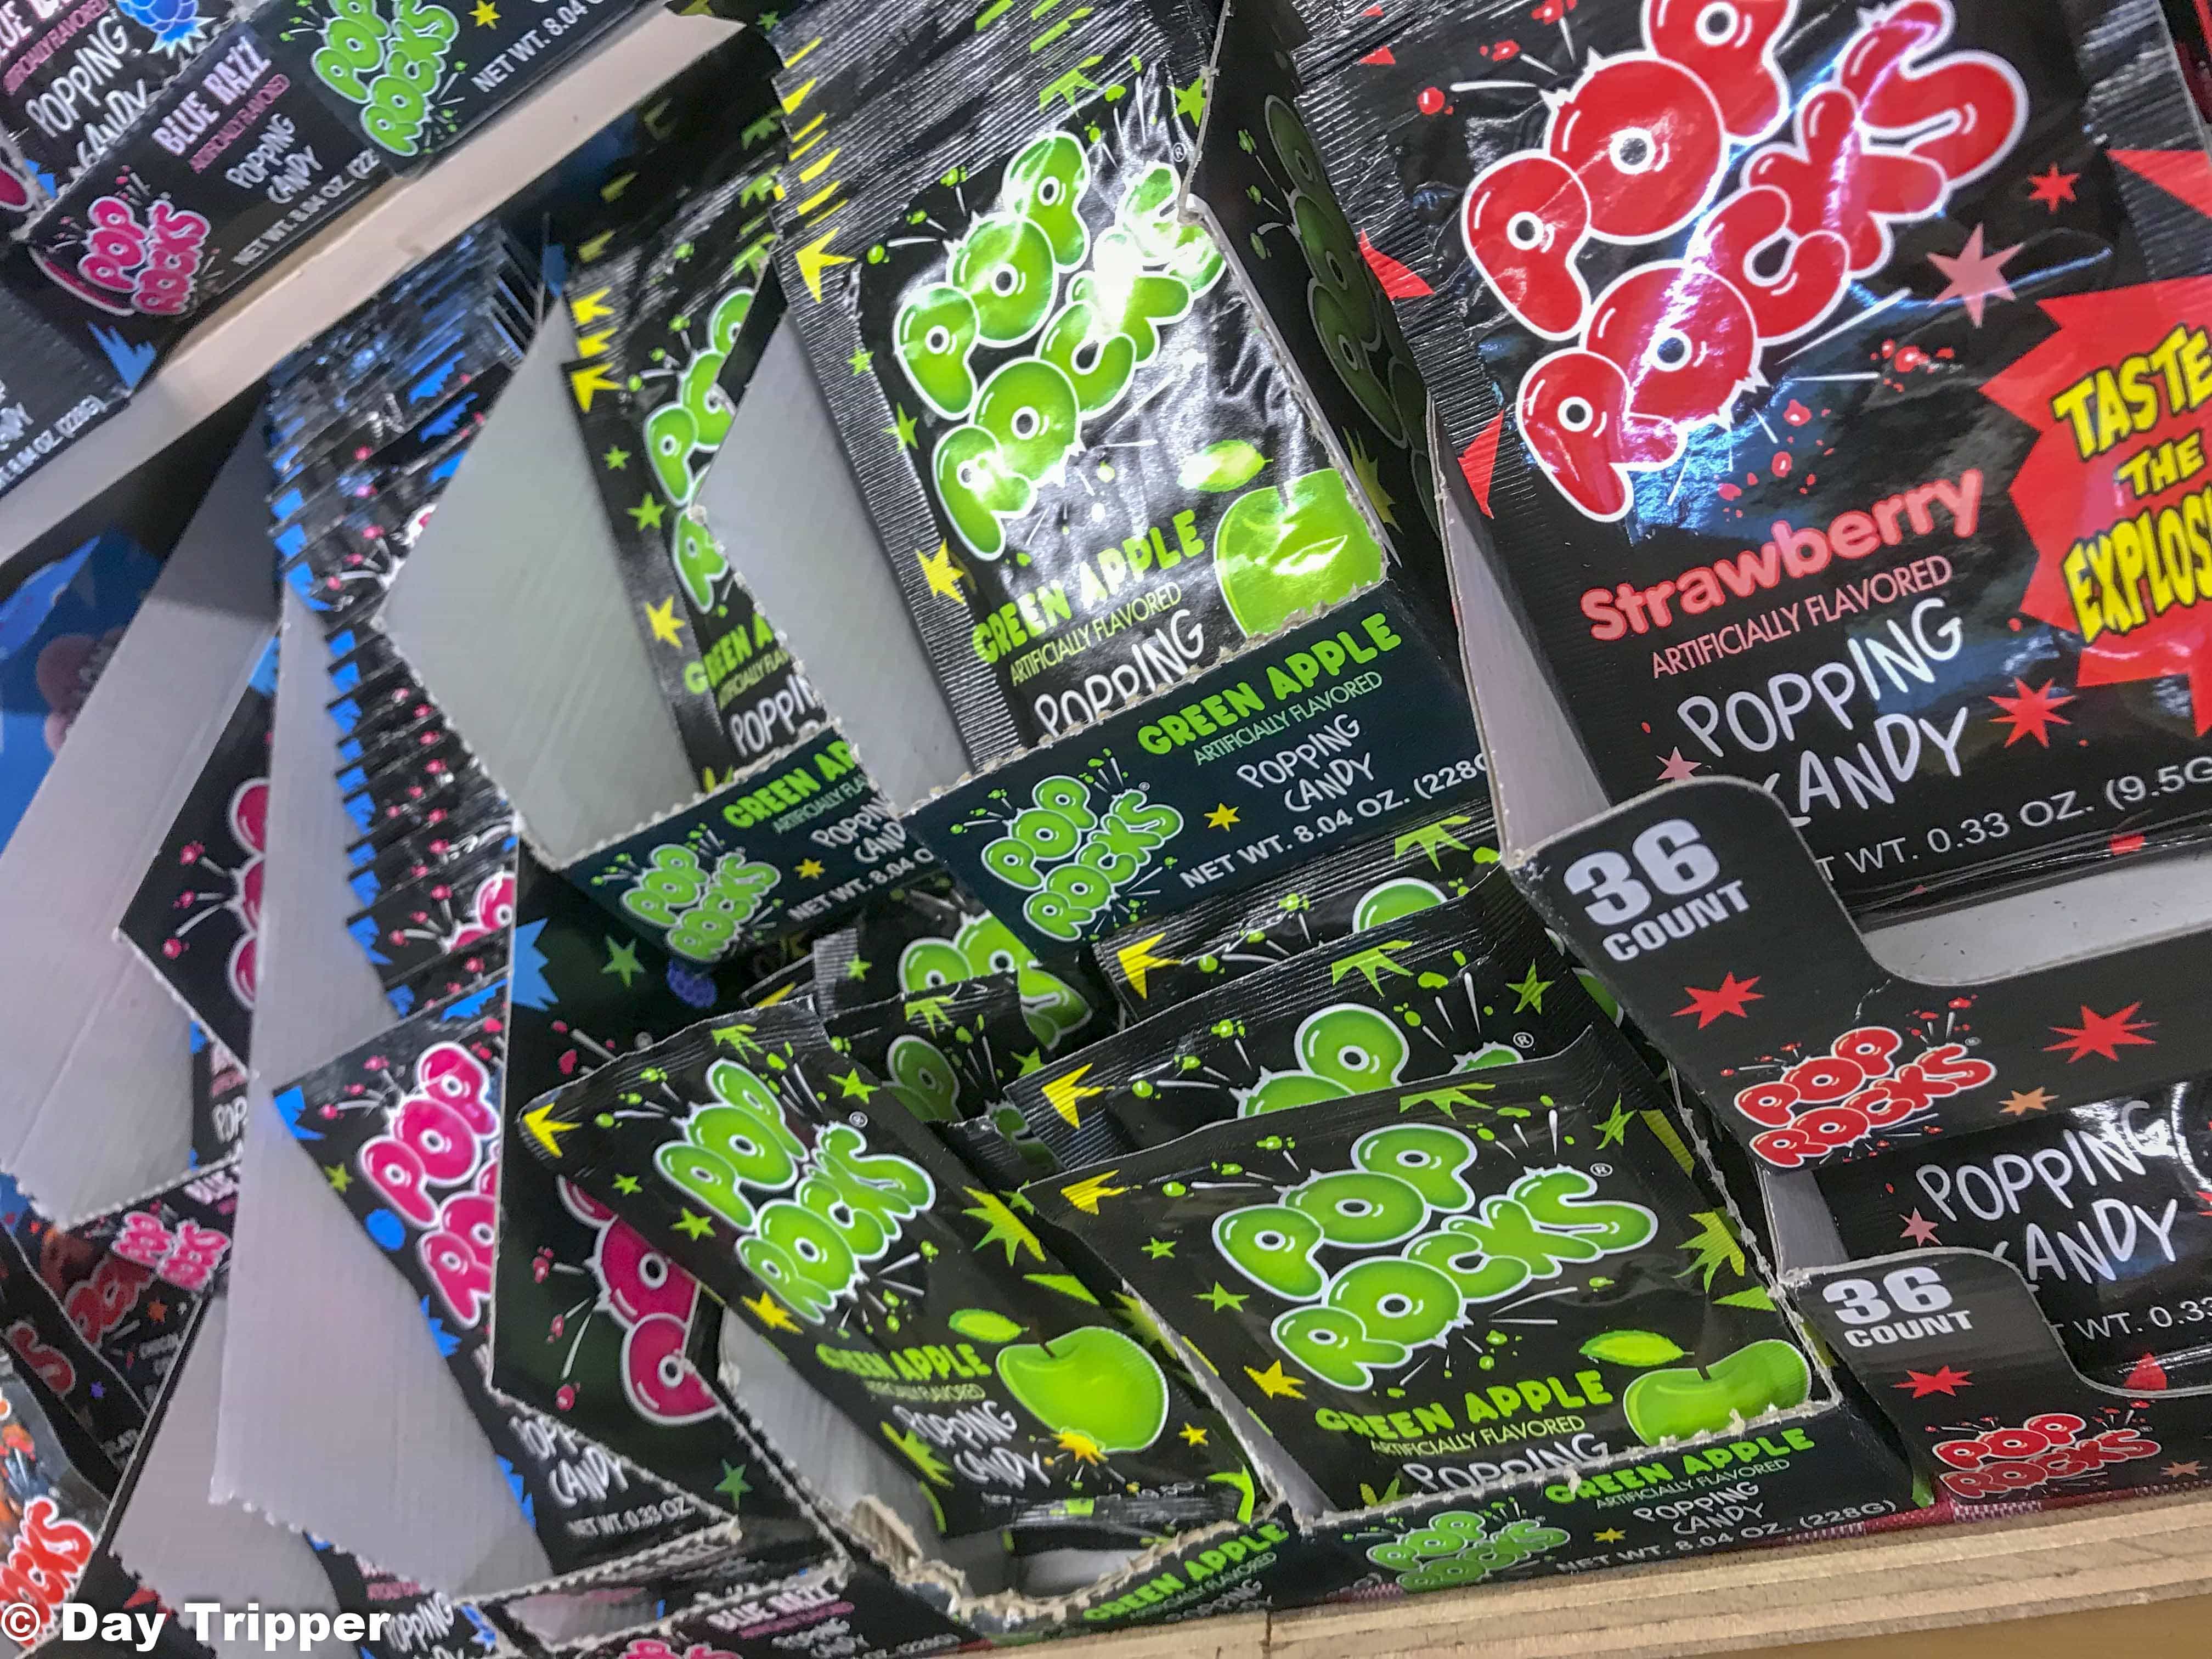 Pop Rocks at MN's Largest Candy Store